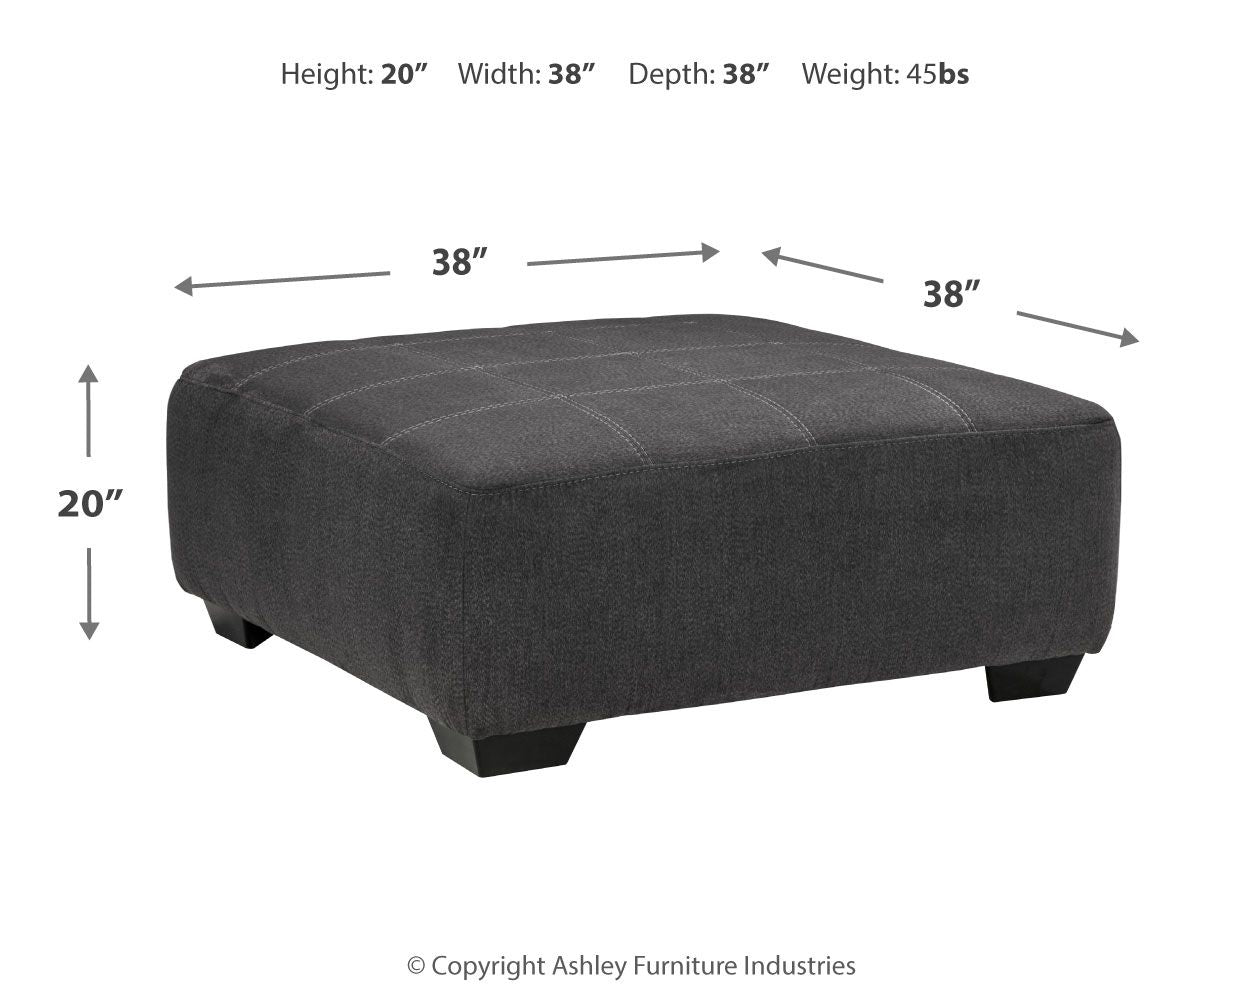 Ambee - Slate - Oversized Accent Ottoman Tony's Home Furnishings Furniture. Beds. Dressers. Sofas.